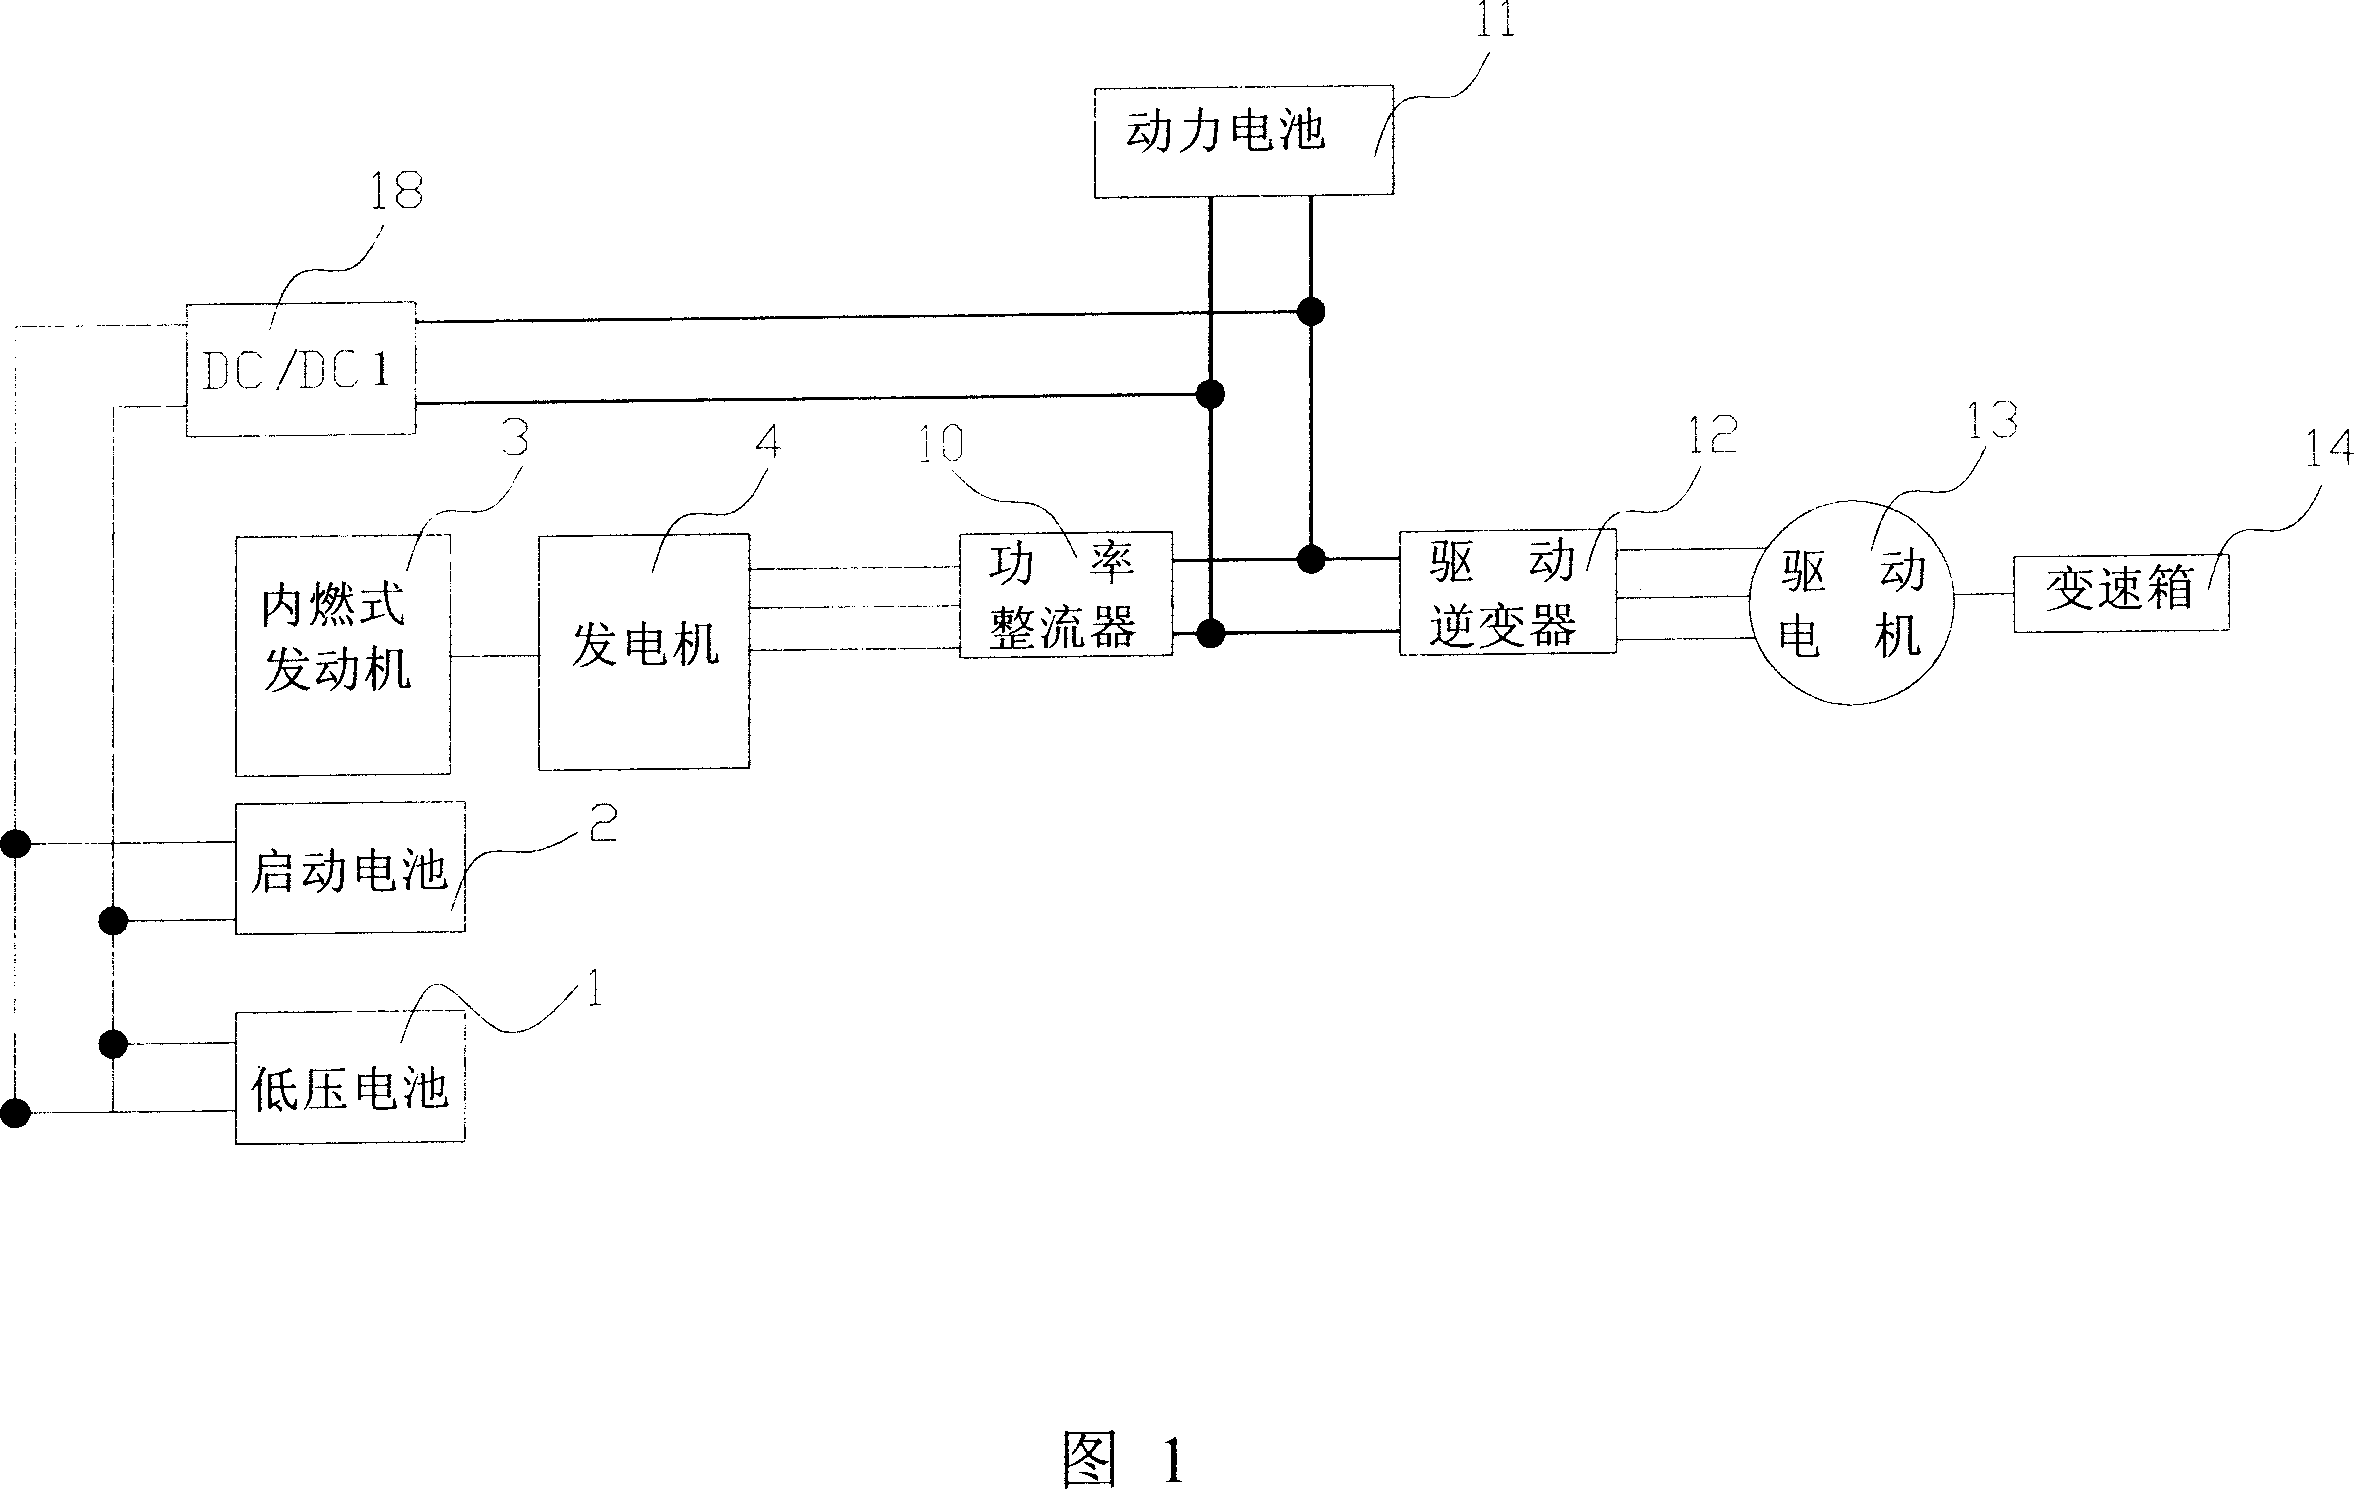 Symmetrically arranged power source for electric vehicles and its motor driving system